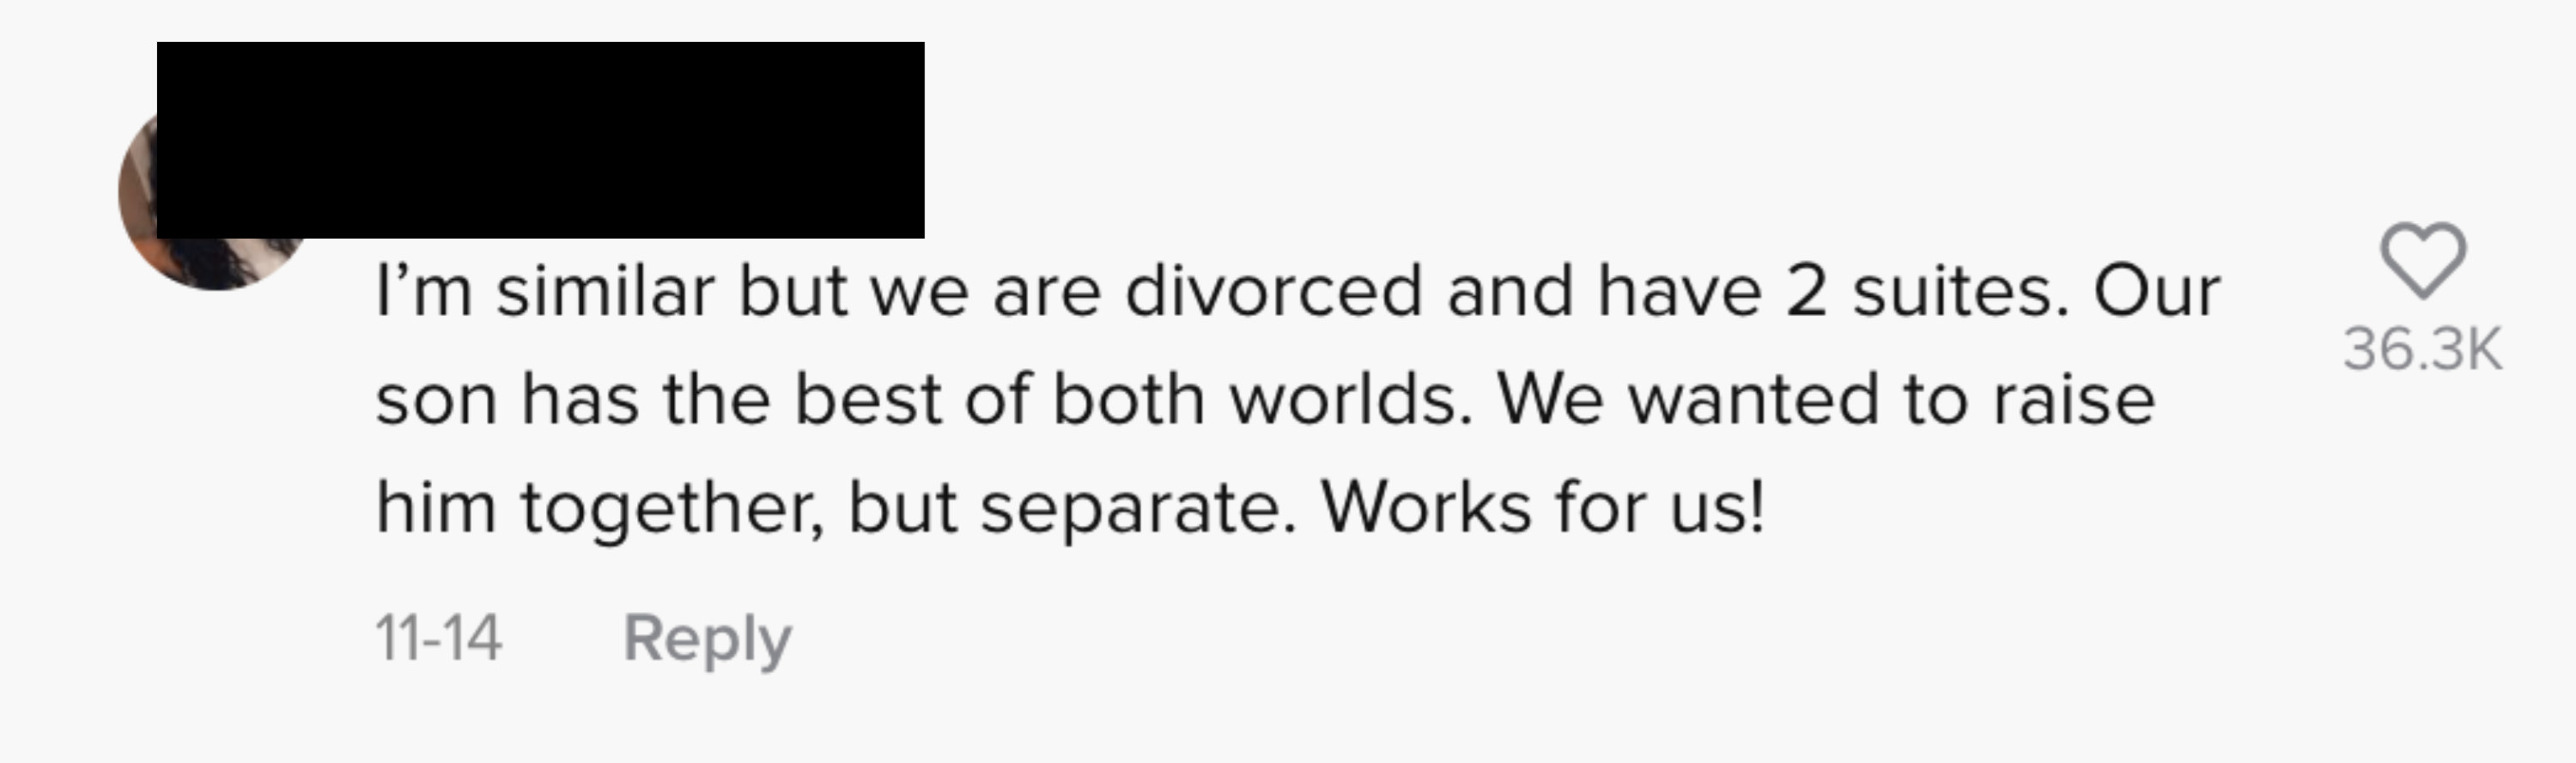 I&#x27;m similar but we are divorced and have 2 suites. Our son has the best of both worlds. We wanted to raise him together, but separate. Works for us!